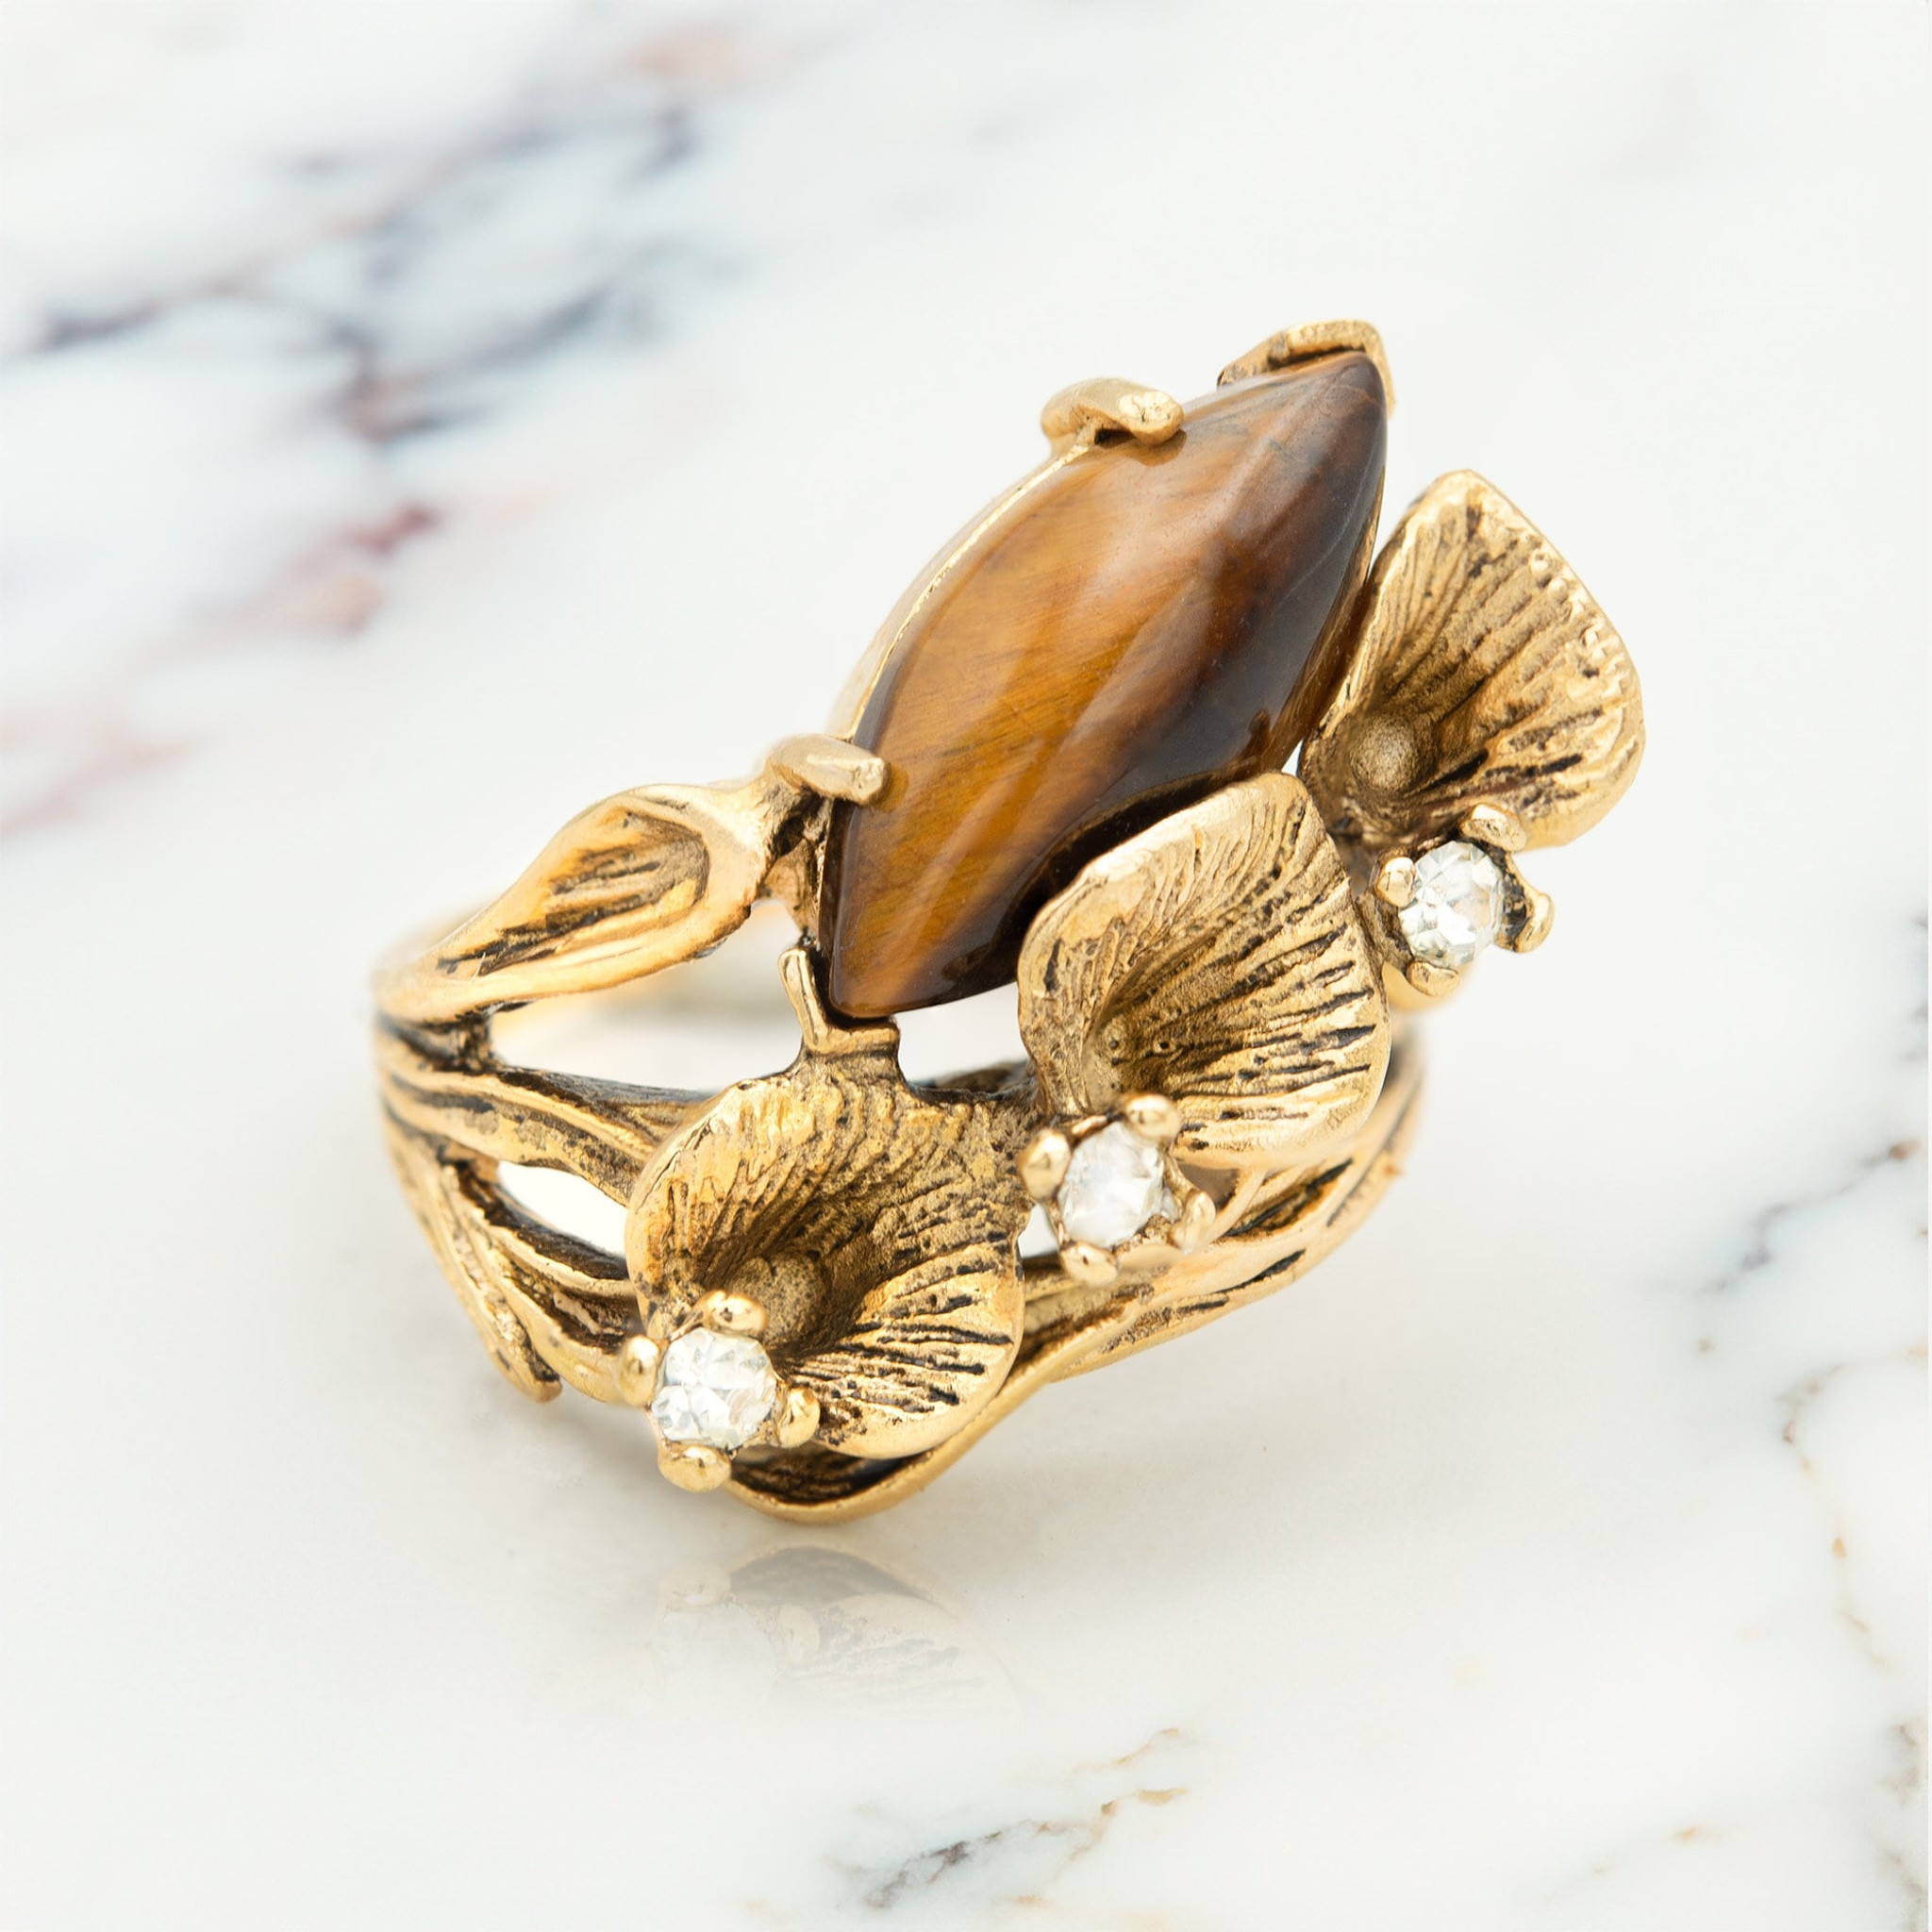 Buy 10k Yellow Gold Tiger Head Ring Online at SO ICY JEWELRY